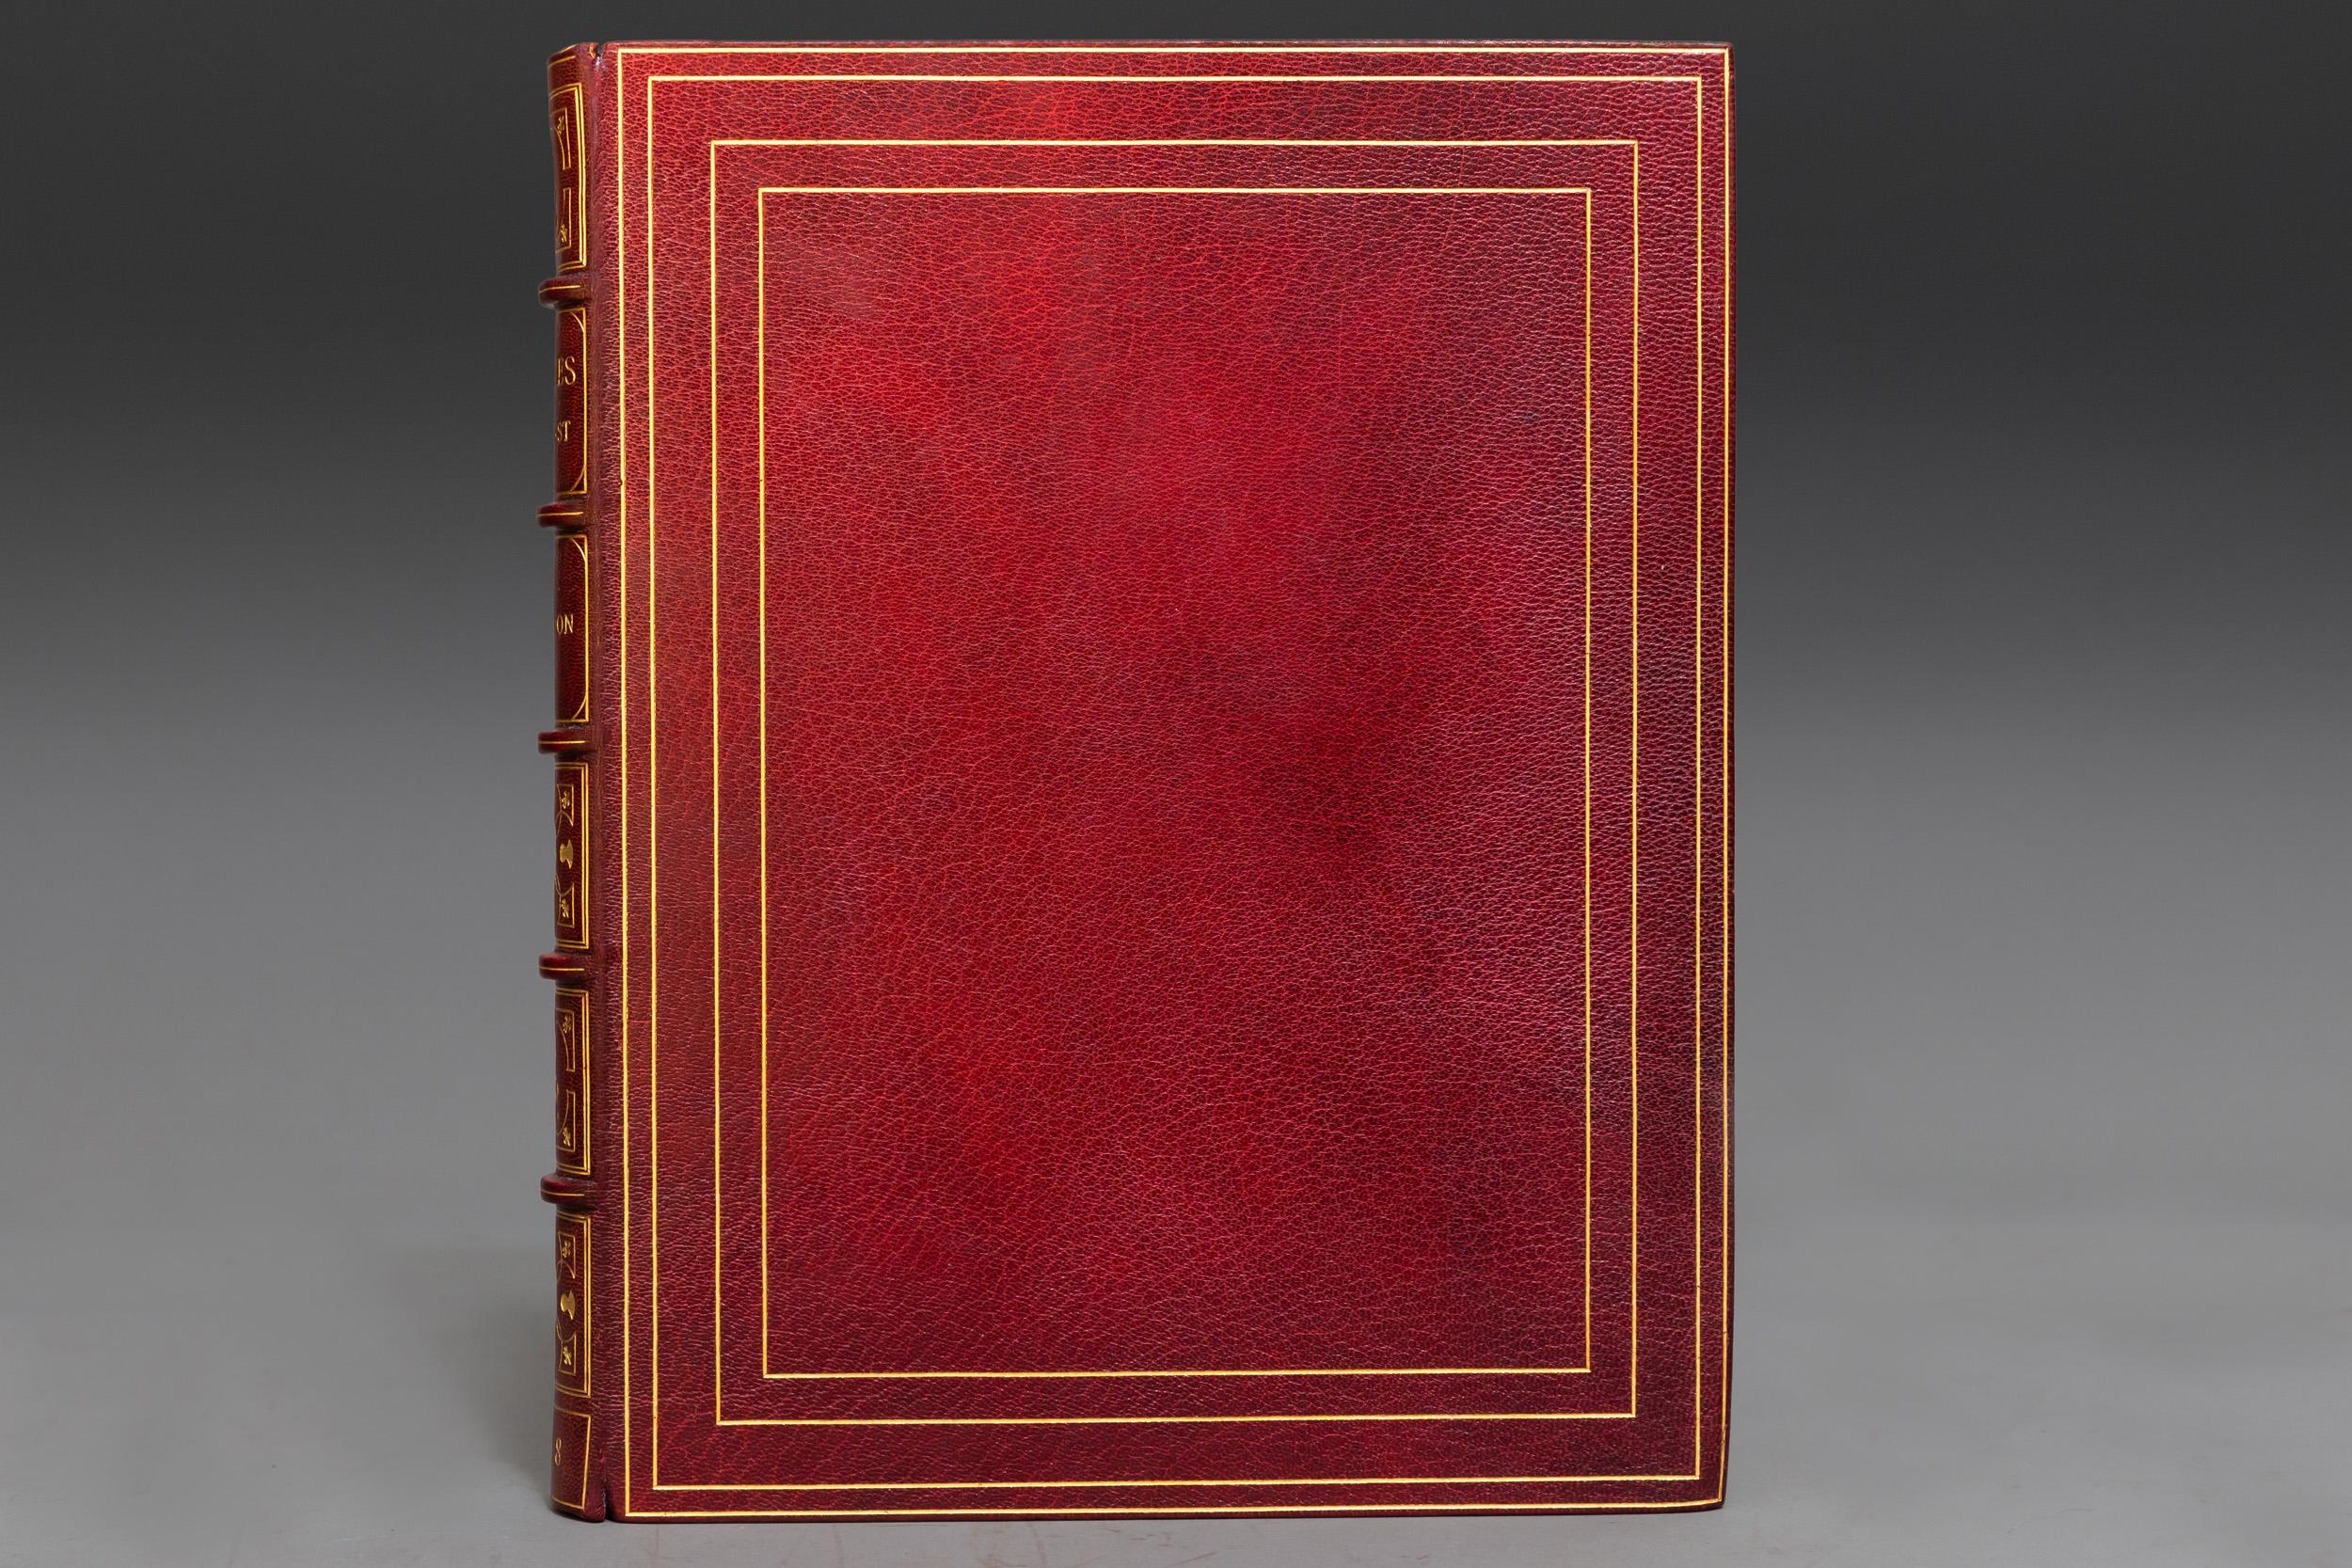 1 Volume

Bound In Full Red Morocco, Marbled Endpapers, top edges gilt, raised bands, gilt on spine and covers.

Illustrated. 

Limited to 500 Copies, Printed On Japanese Vellum, This is #110, Hand-Colored Frontispiece, Plates In Two States.